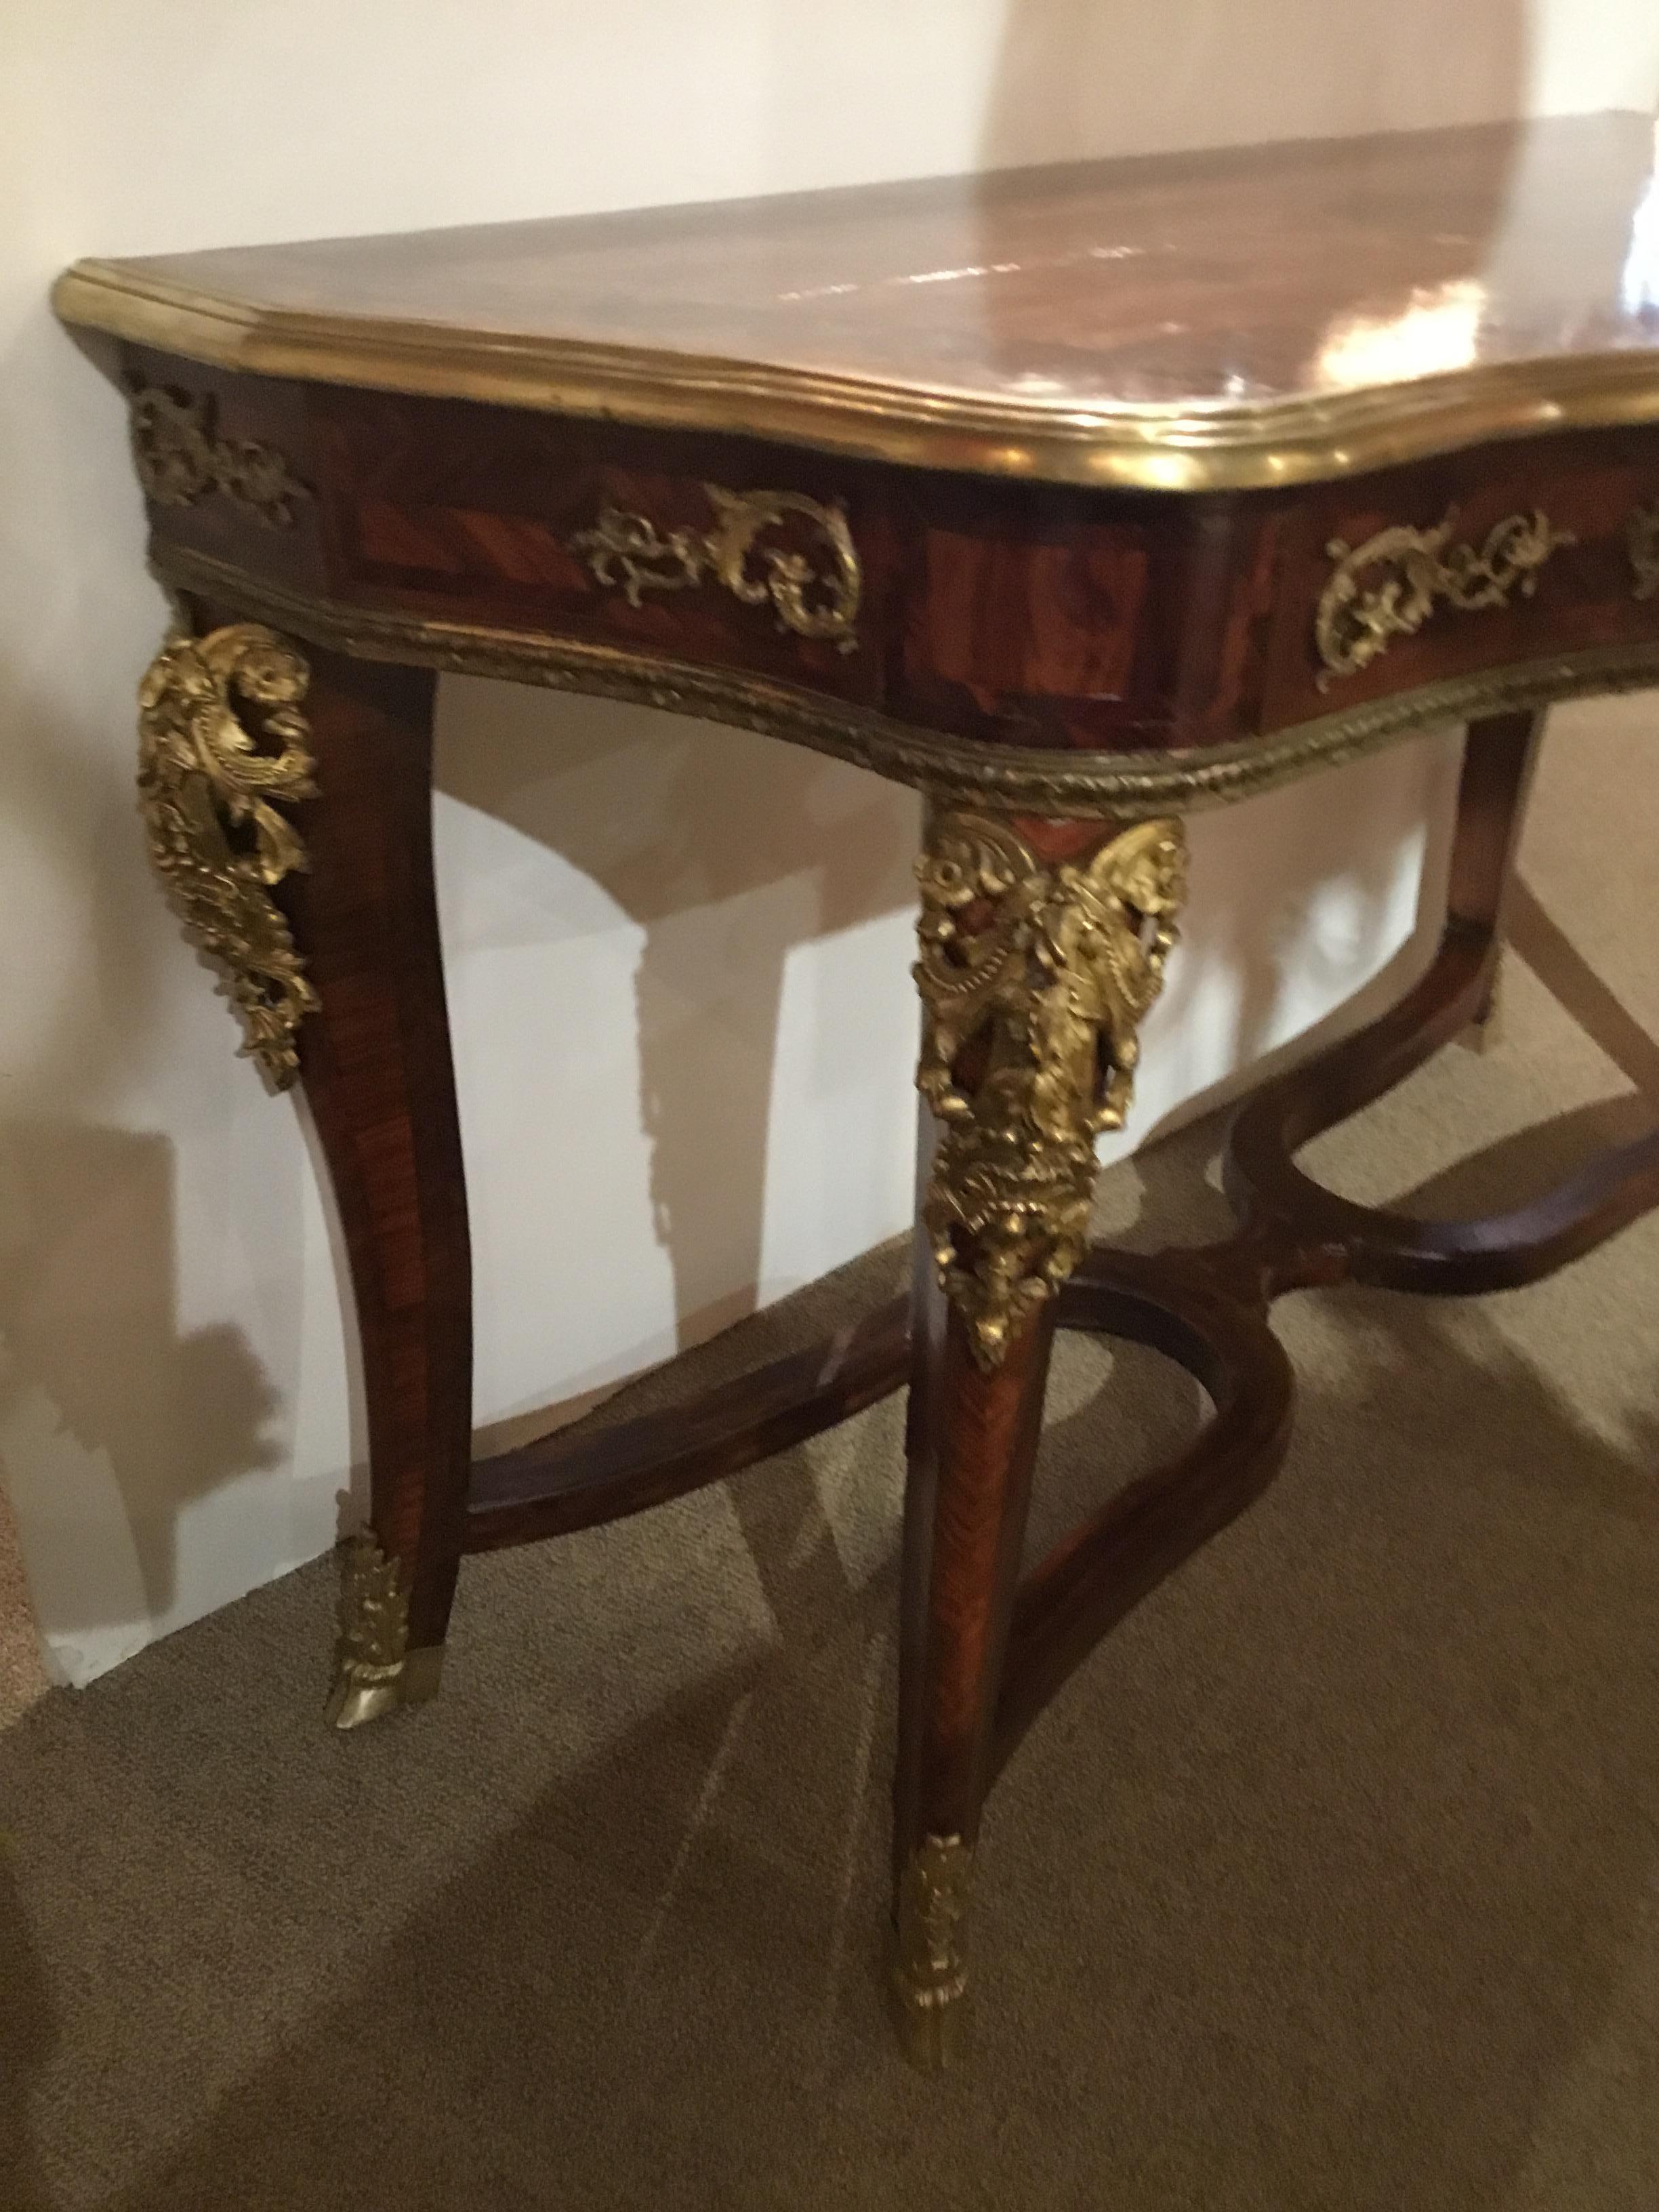 French Regence Gilt Bronze Mounted Parquetry Inlaid Hardwood Console Table 18th Century For Sale